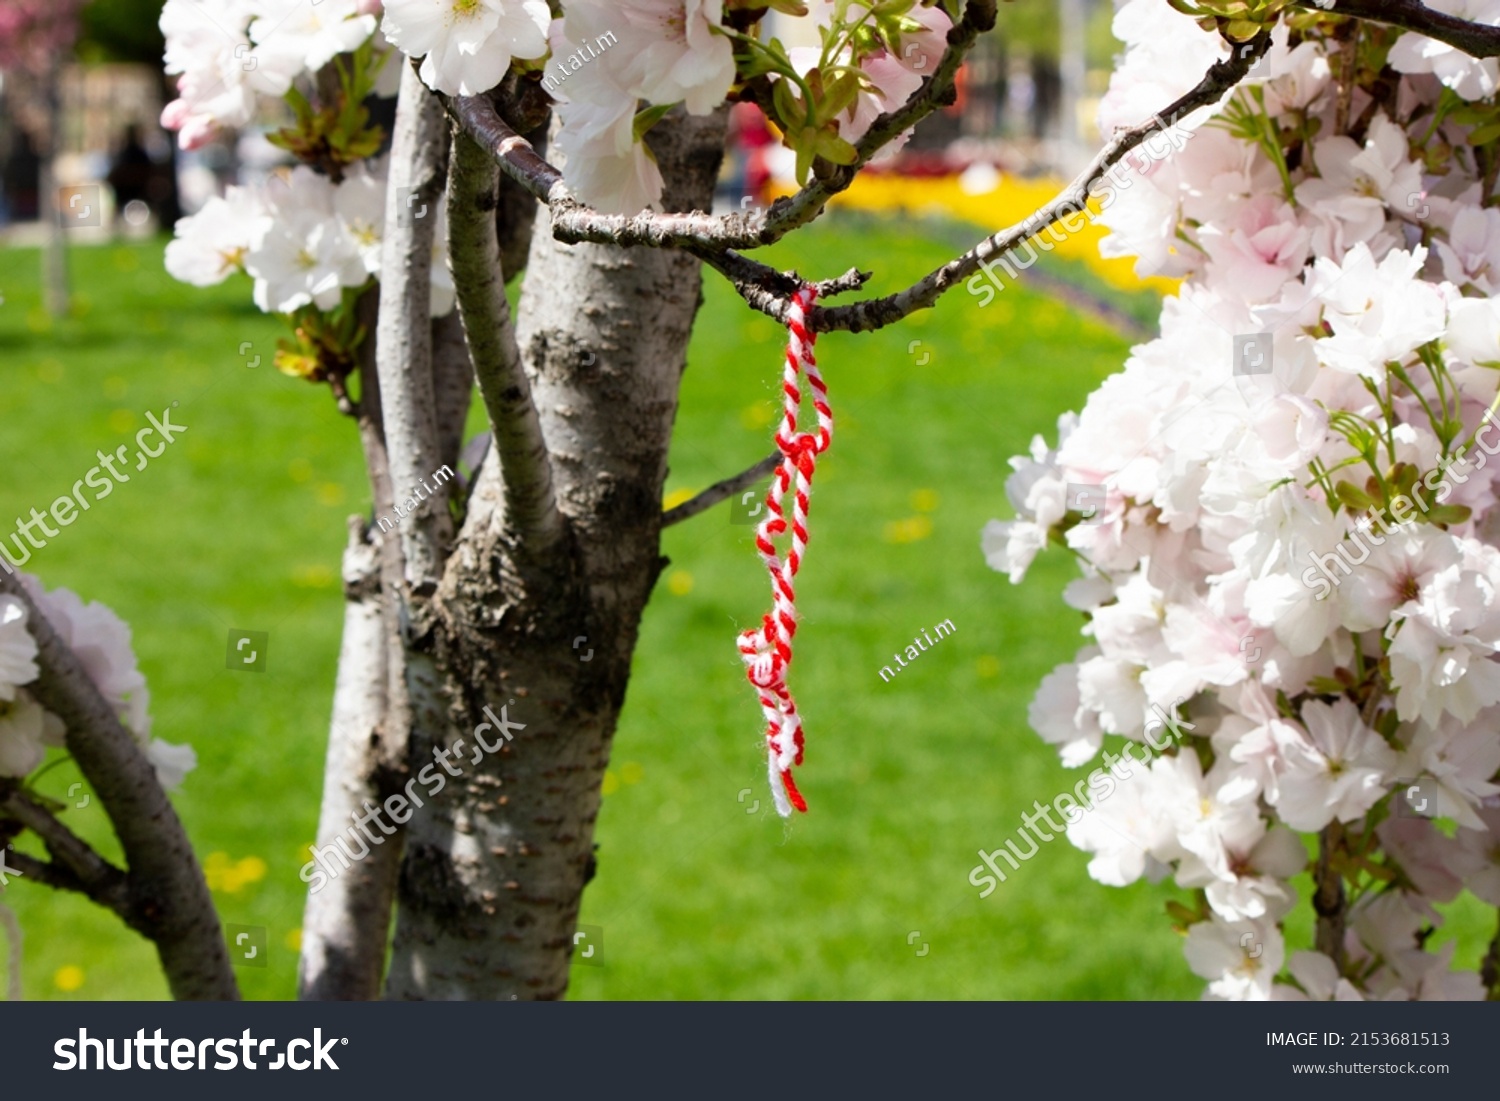 Closeup of Martenitsa (мартеница) traditional decoration in Bulgaria and Macedonia, adornment, made of white and red yarn, symbol of spring and resurgent nature, tied to blossomed tree to be health #2153681513